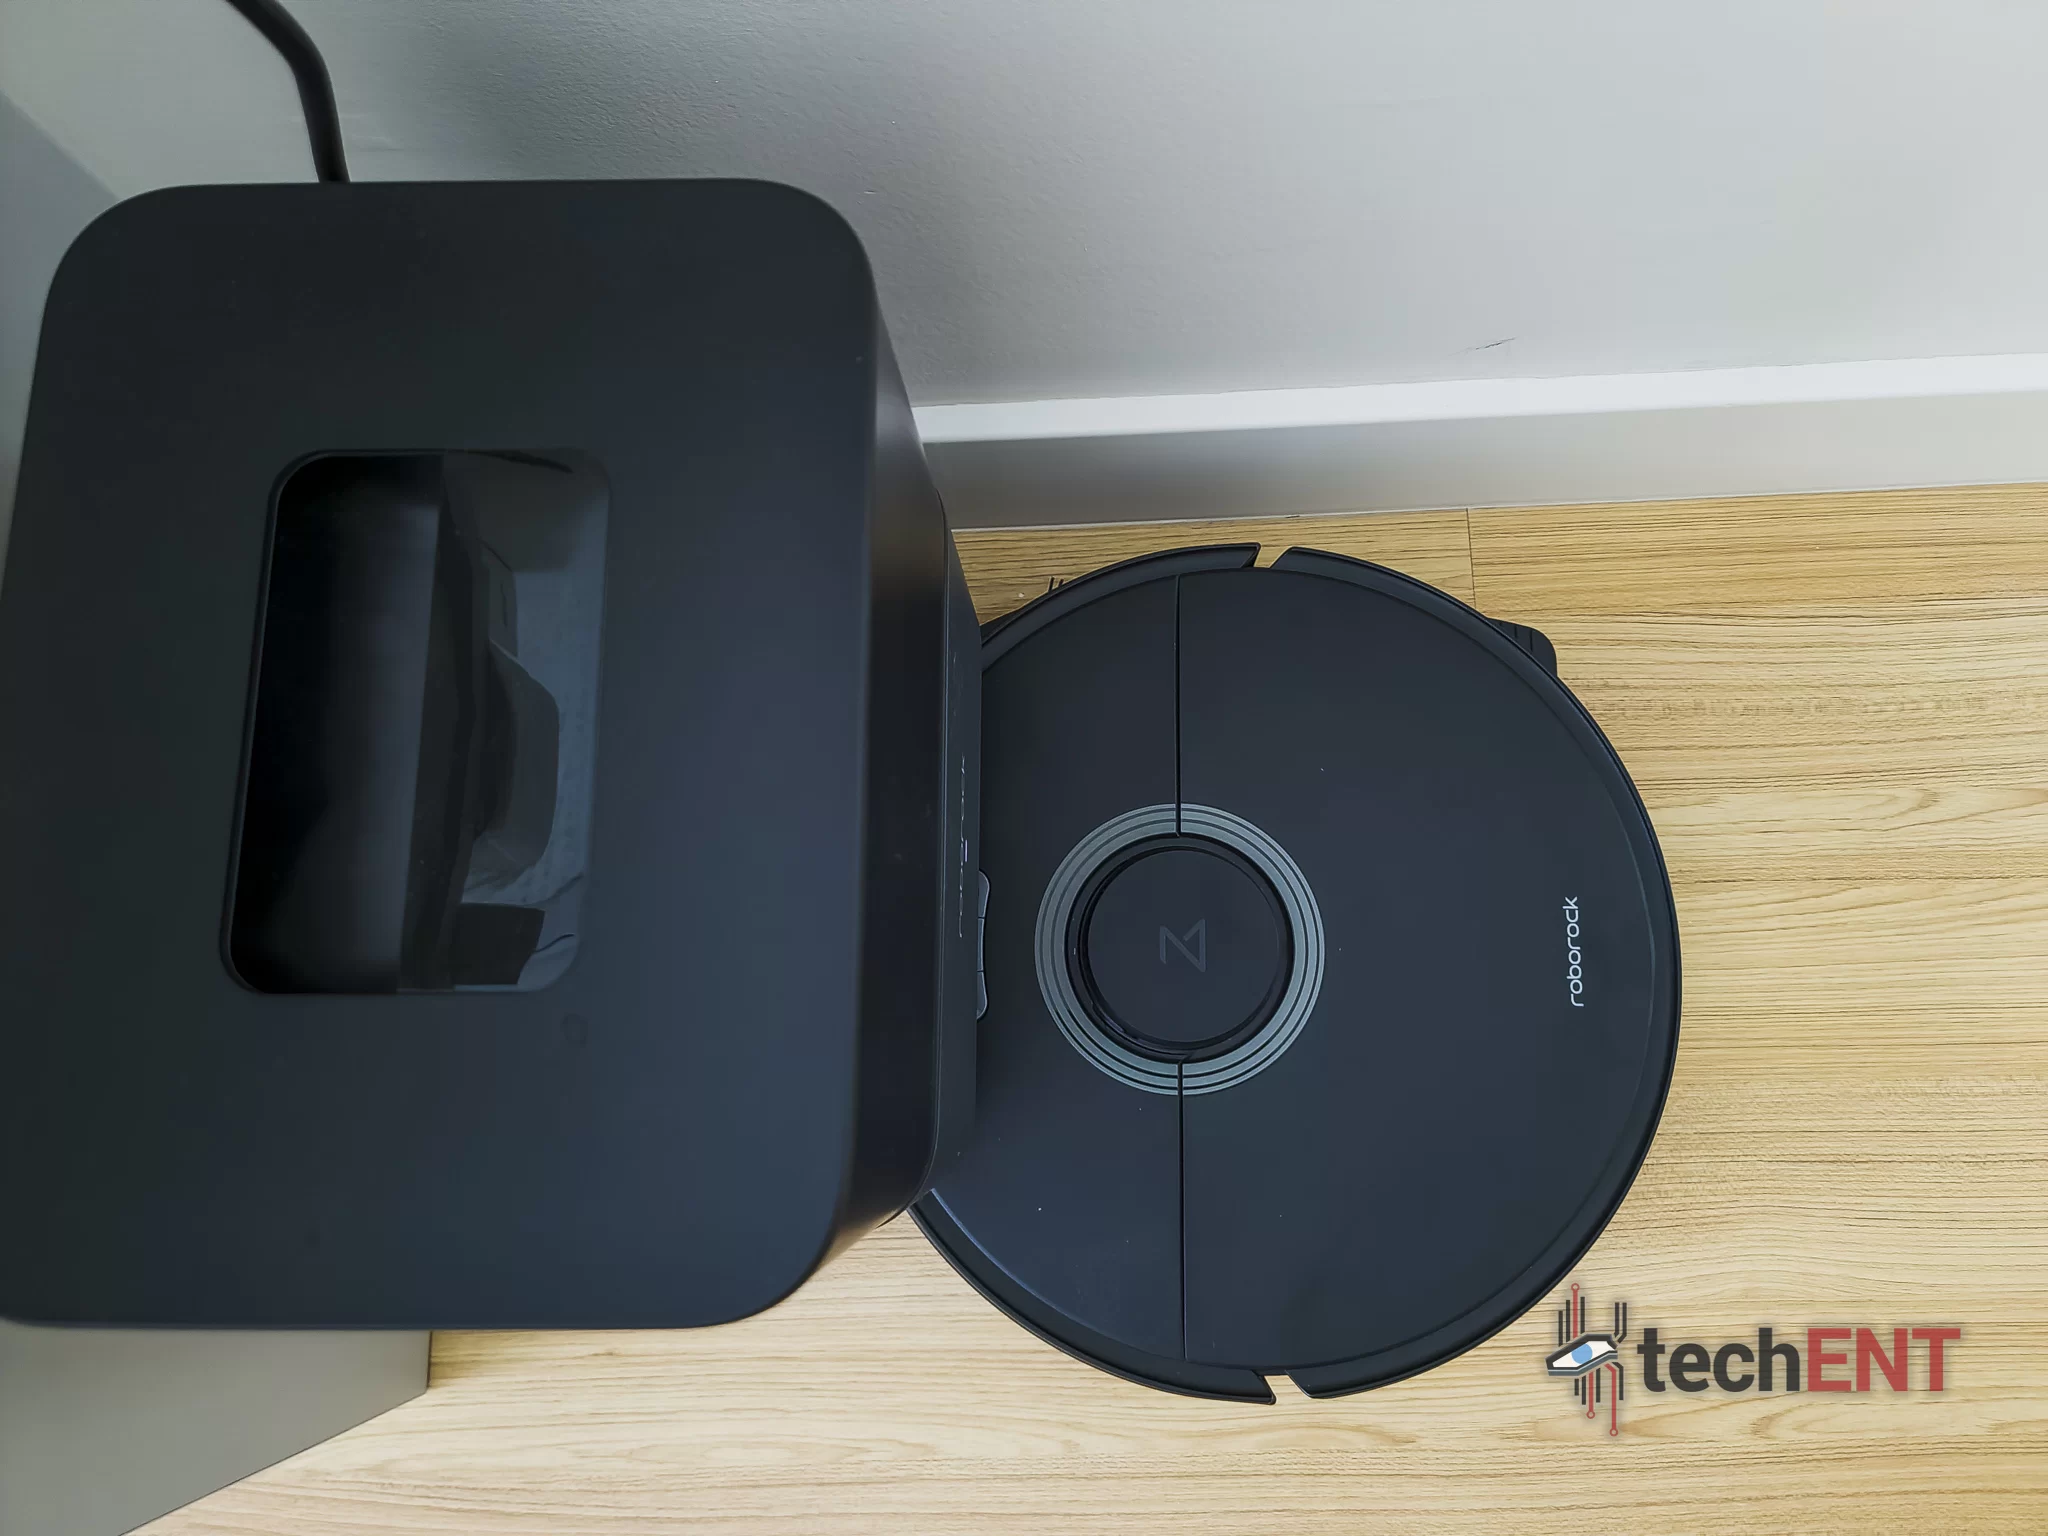 The Roborock Q7 Max+ In-Depth Review – Out of Sight, Out of Mind